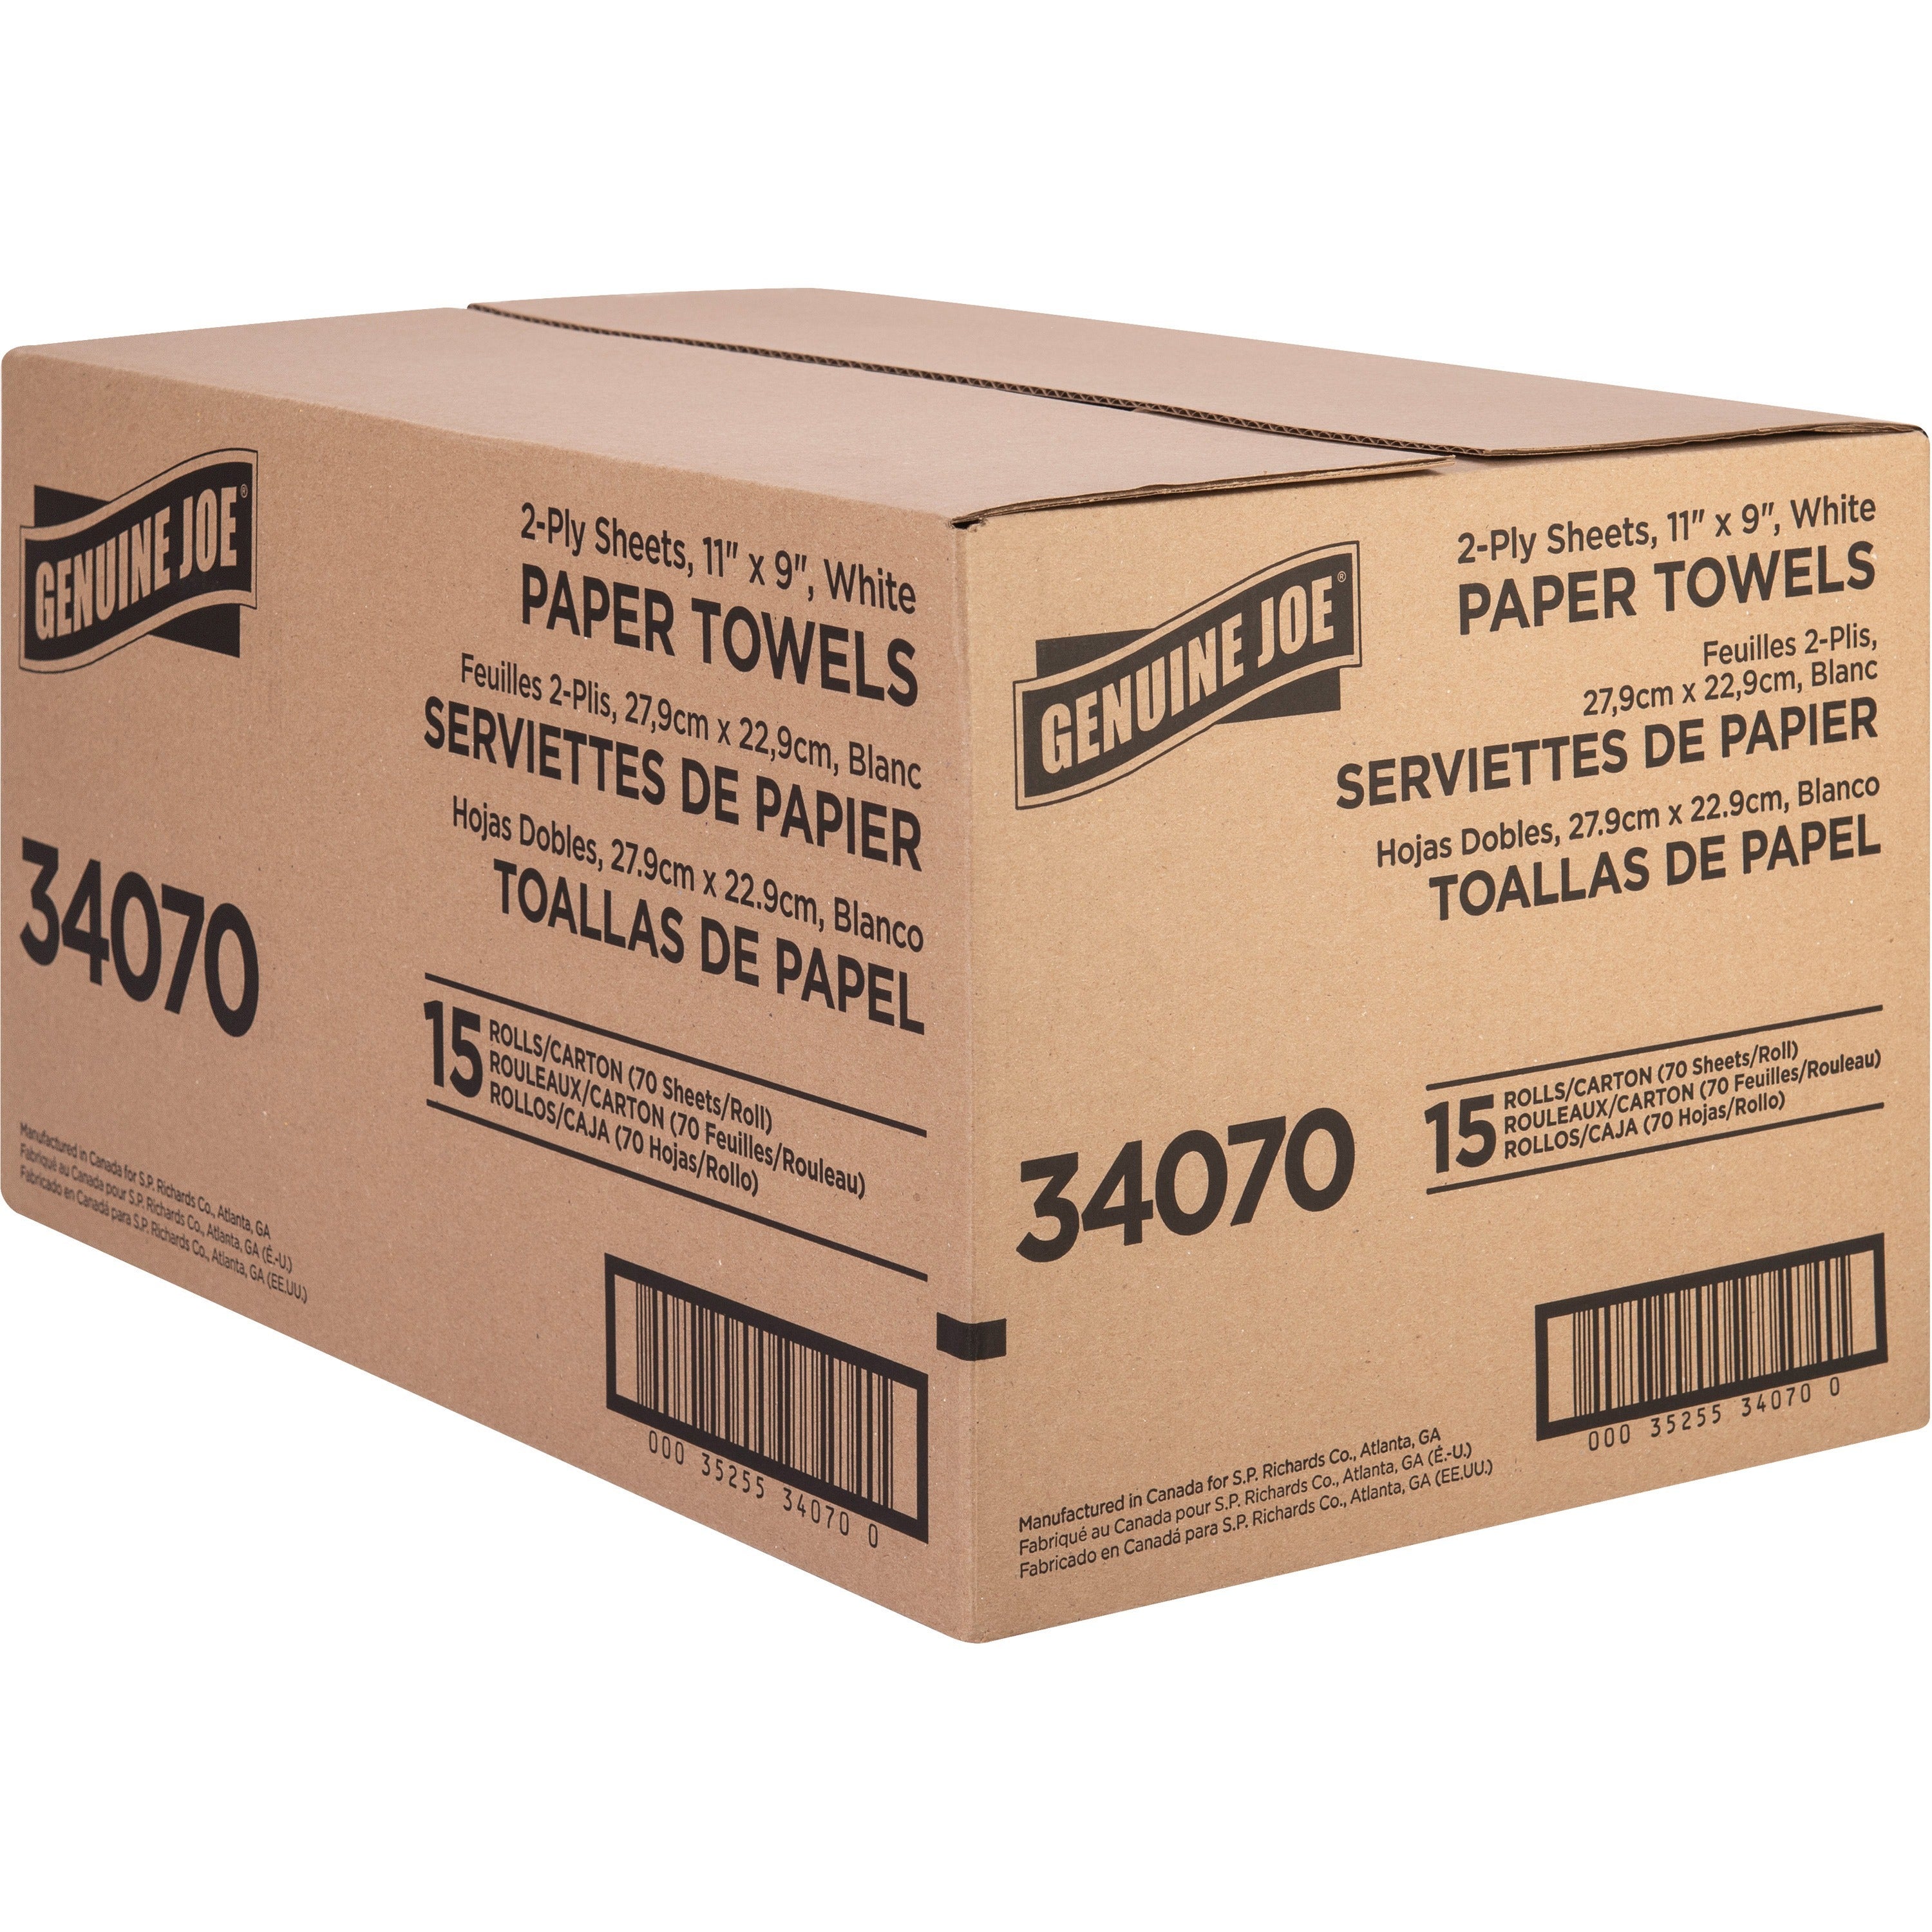 genuine-joe-2-ply-paper-towel-rolls-2-ply-9-x-11-70-sheets-roll-white-paper-absorbent-soft-perforated-tear-resistant-for-hand-food-service-kitchen-breakroom-15-carton_gjo34070 - 3